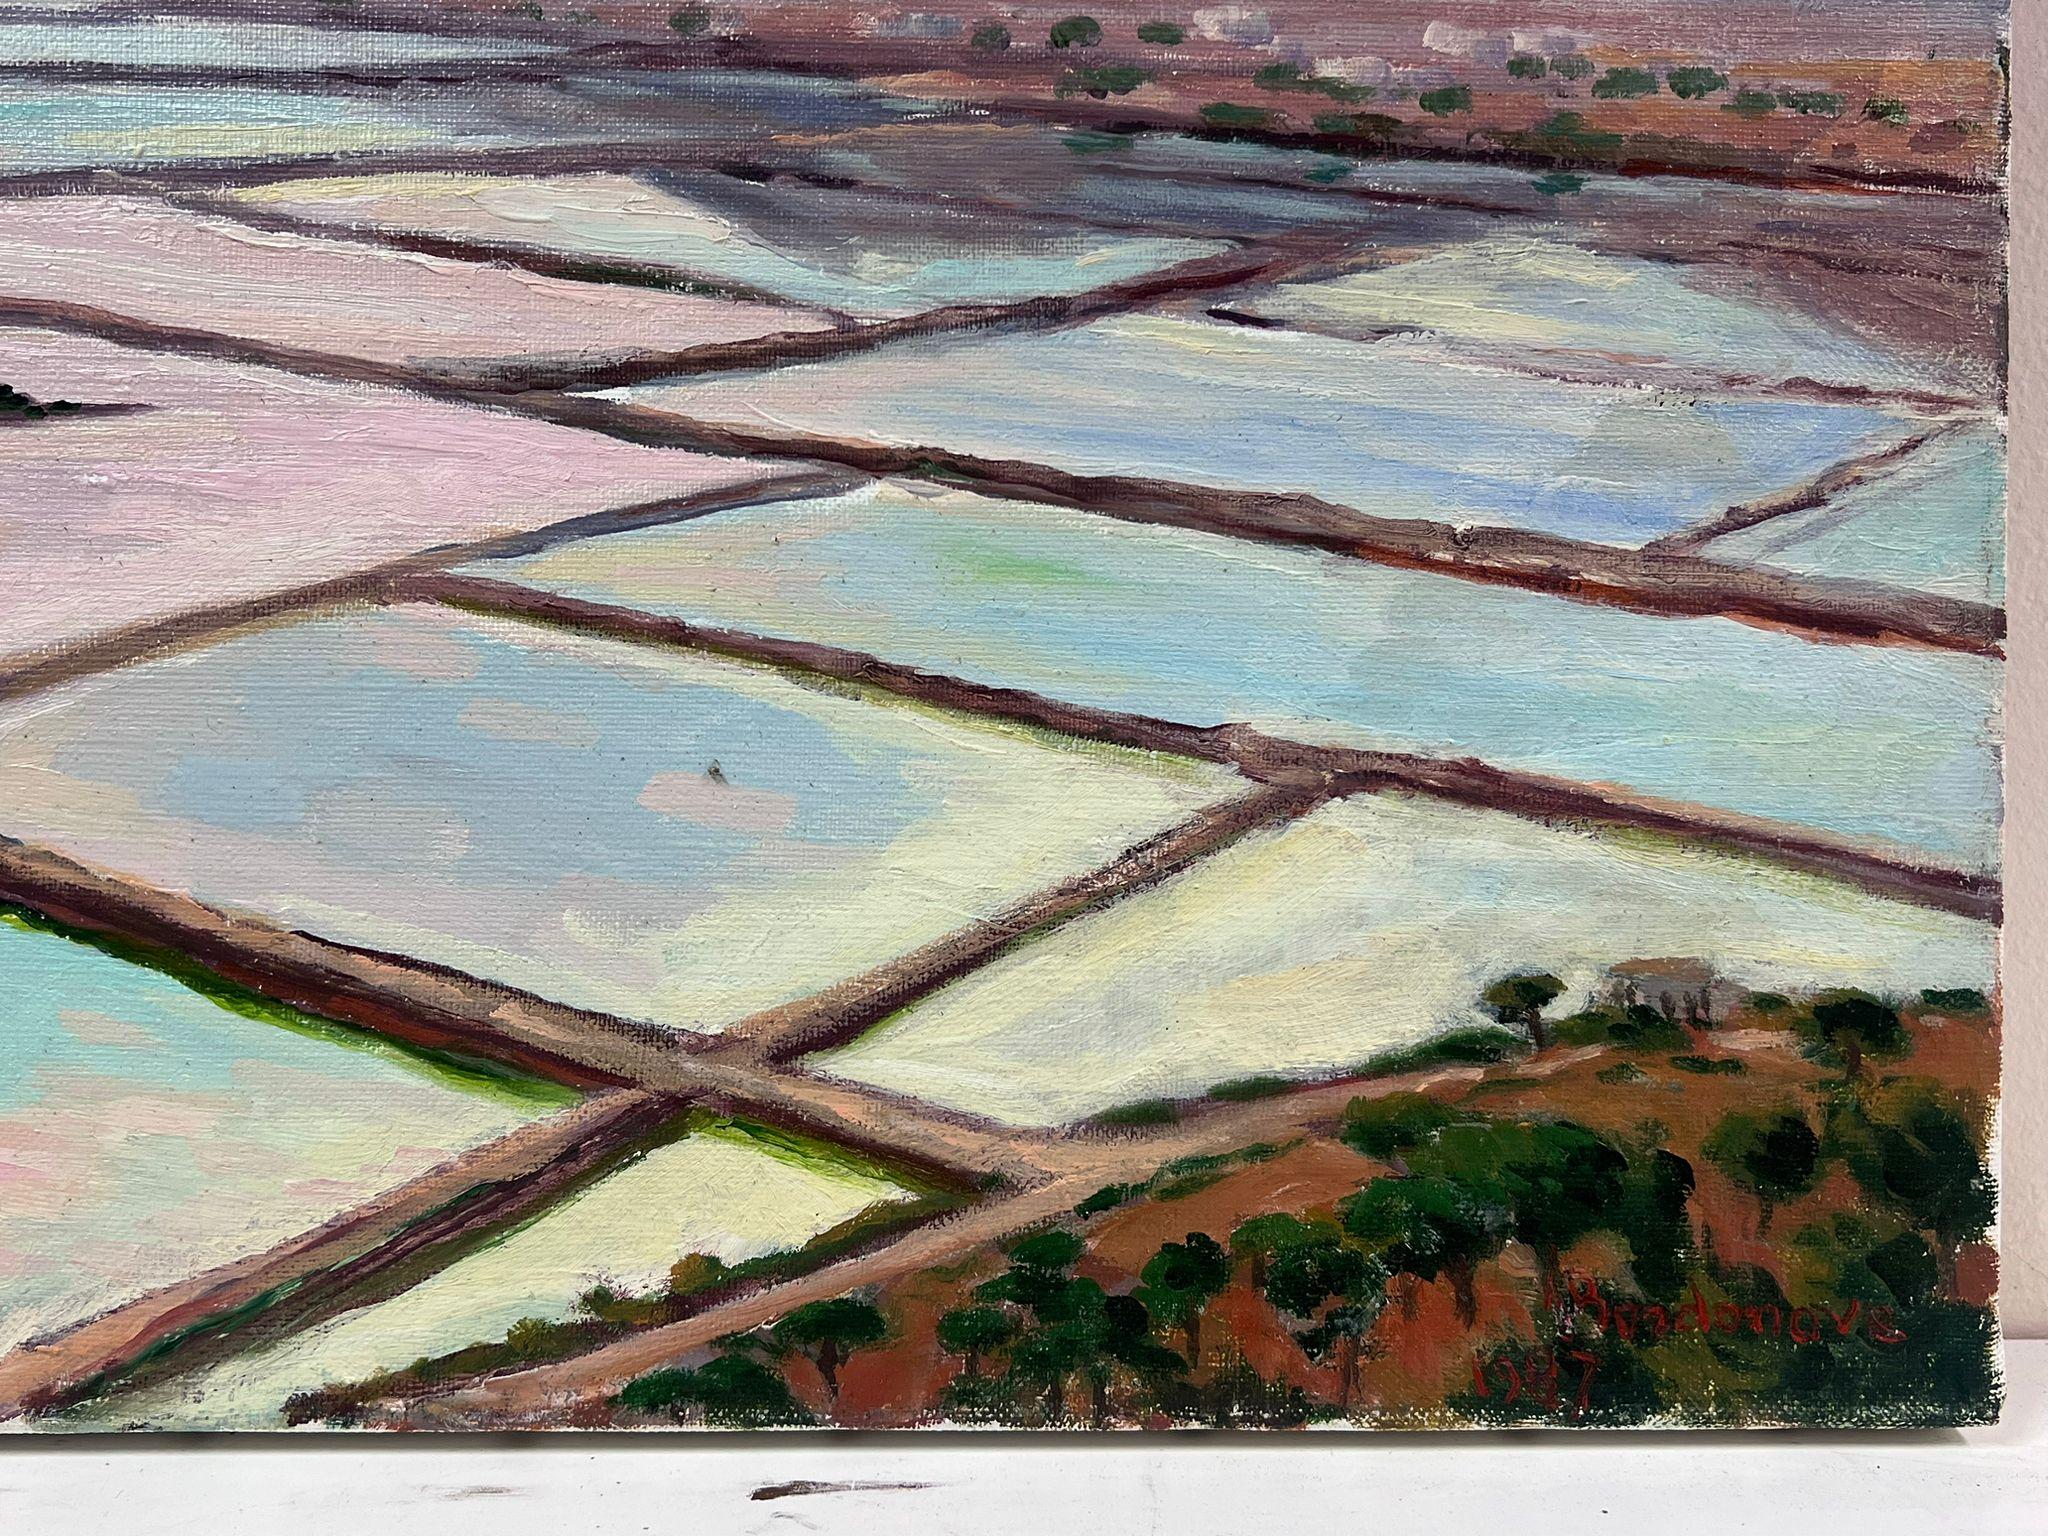 Salt Ponds
signed by Georges Bordonave (French contemporary) 
dated 1987
oil painting on canvas, unframed
unframed: 15 x 22 inches
condition: very good
provenance: from a large private collection of this artists work, western Paris, France. 